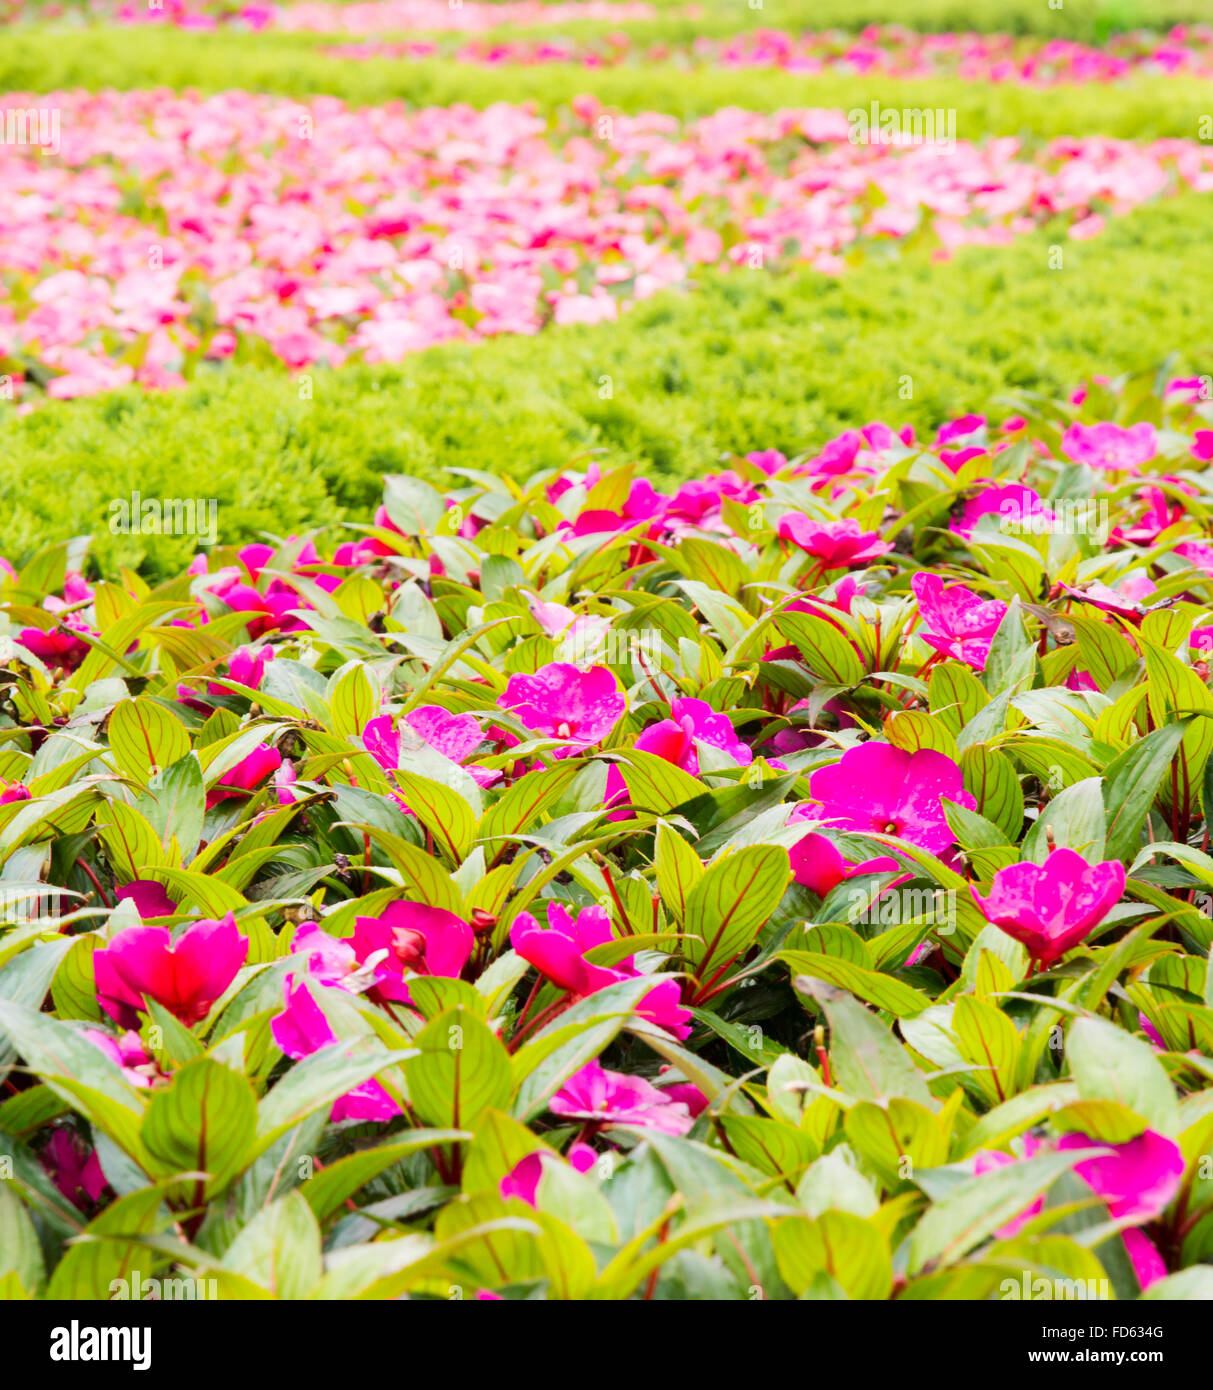 Flower bed with shallow depth of field. Stock Photo